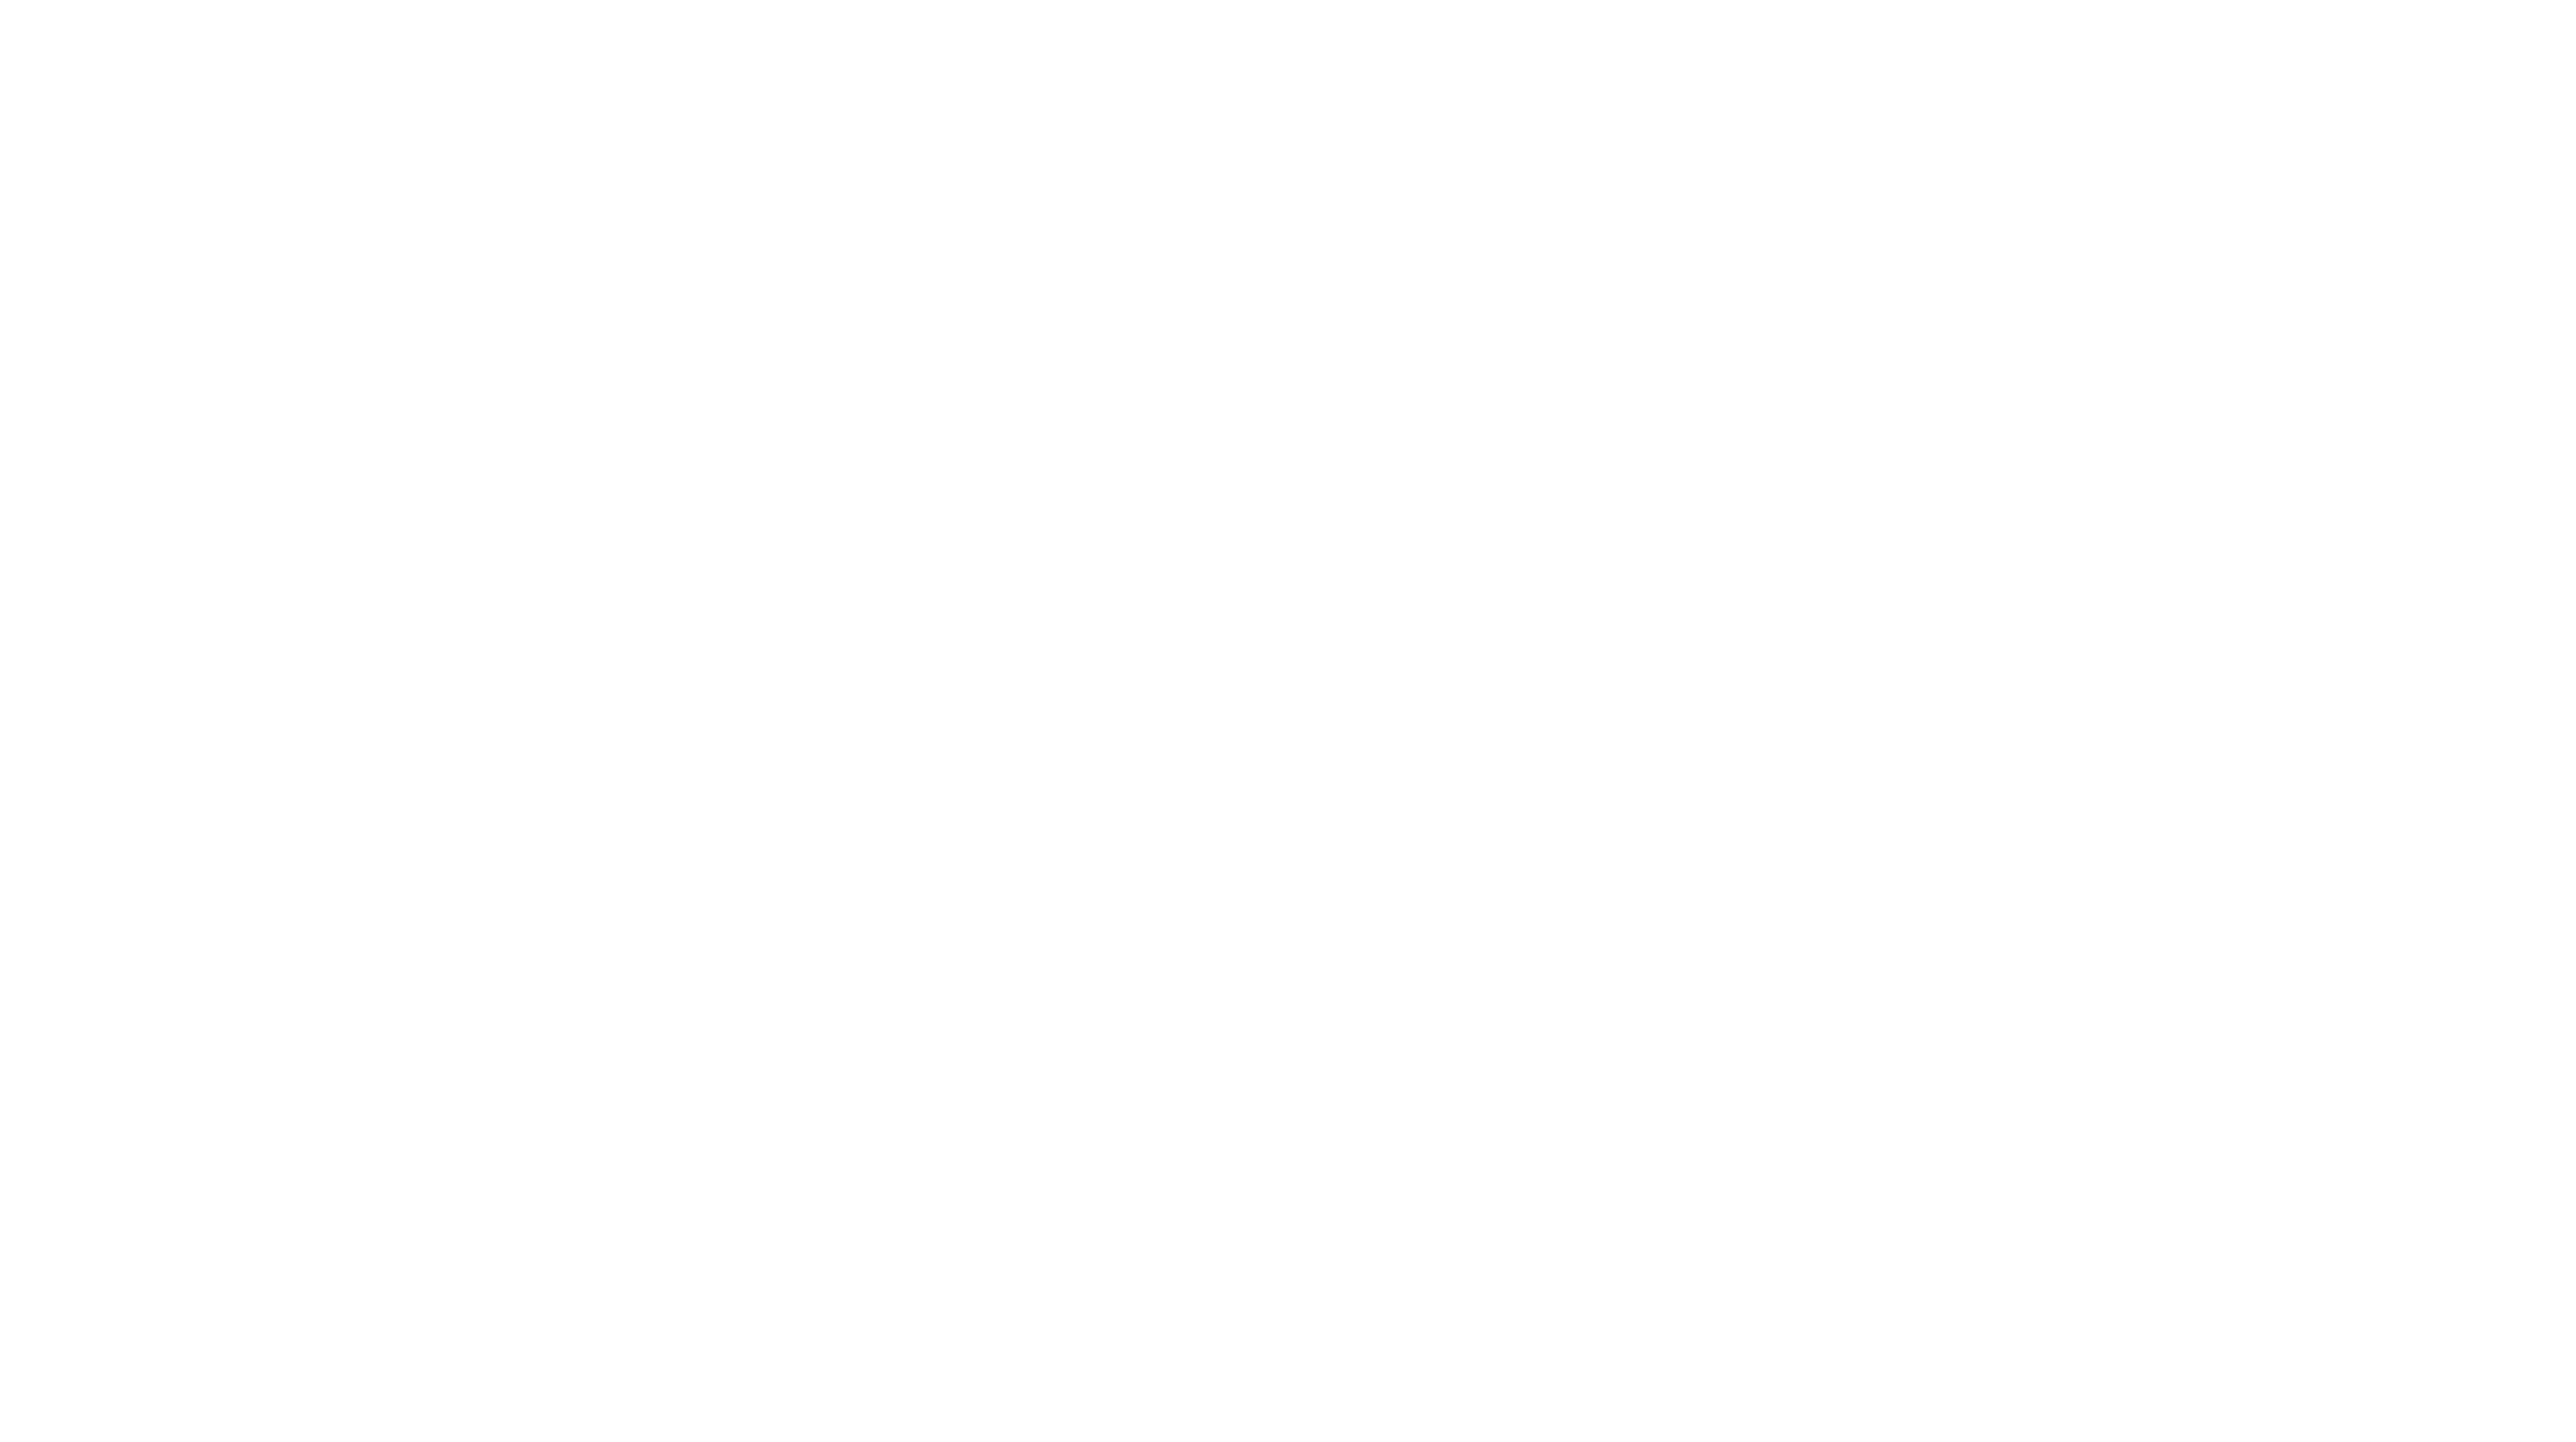 Already see yourself as one of us?